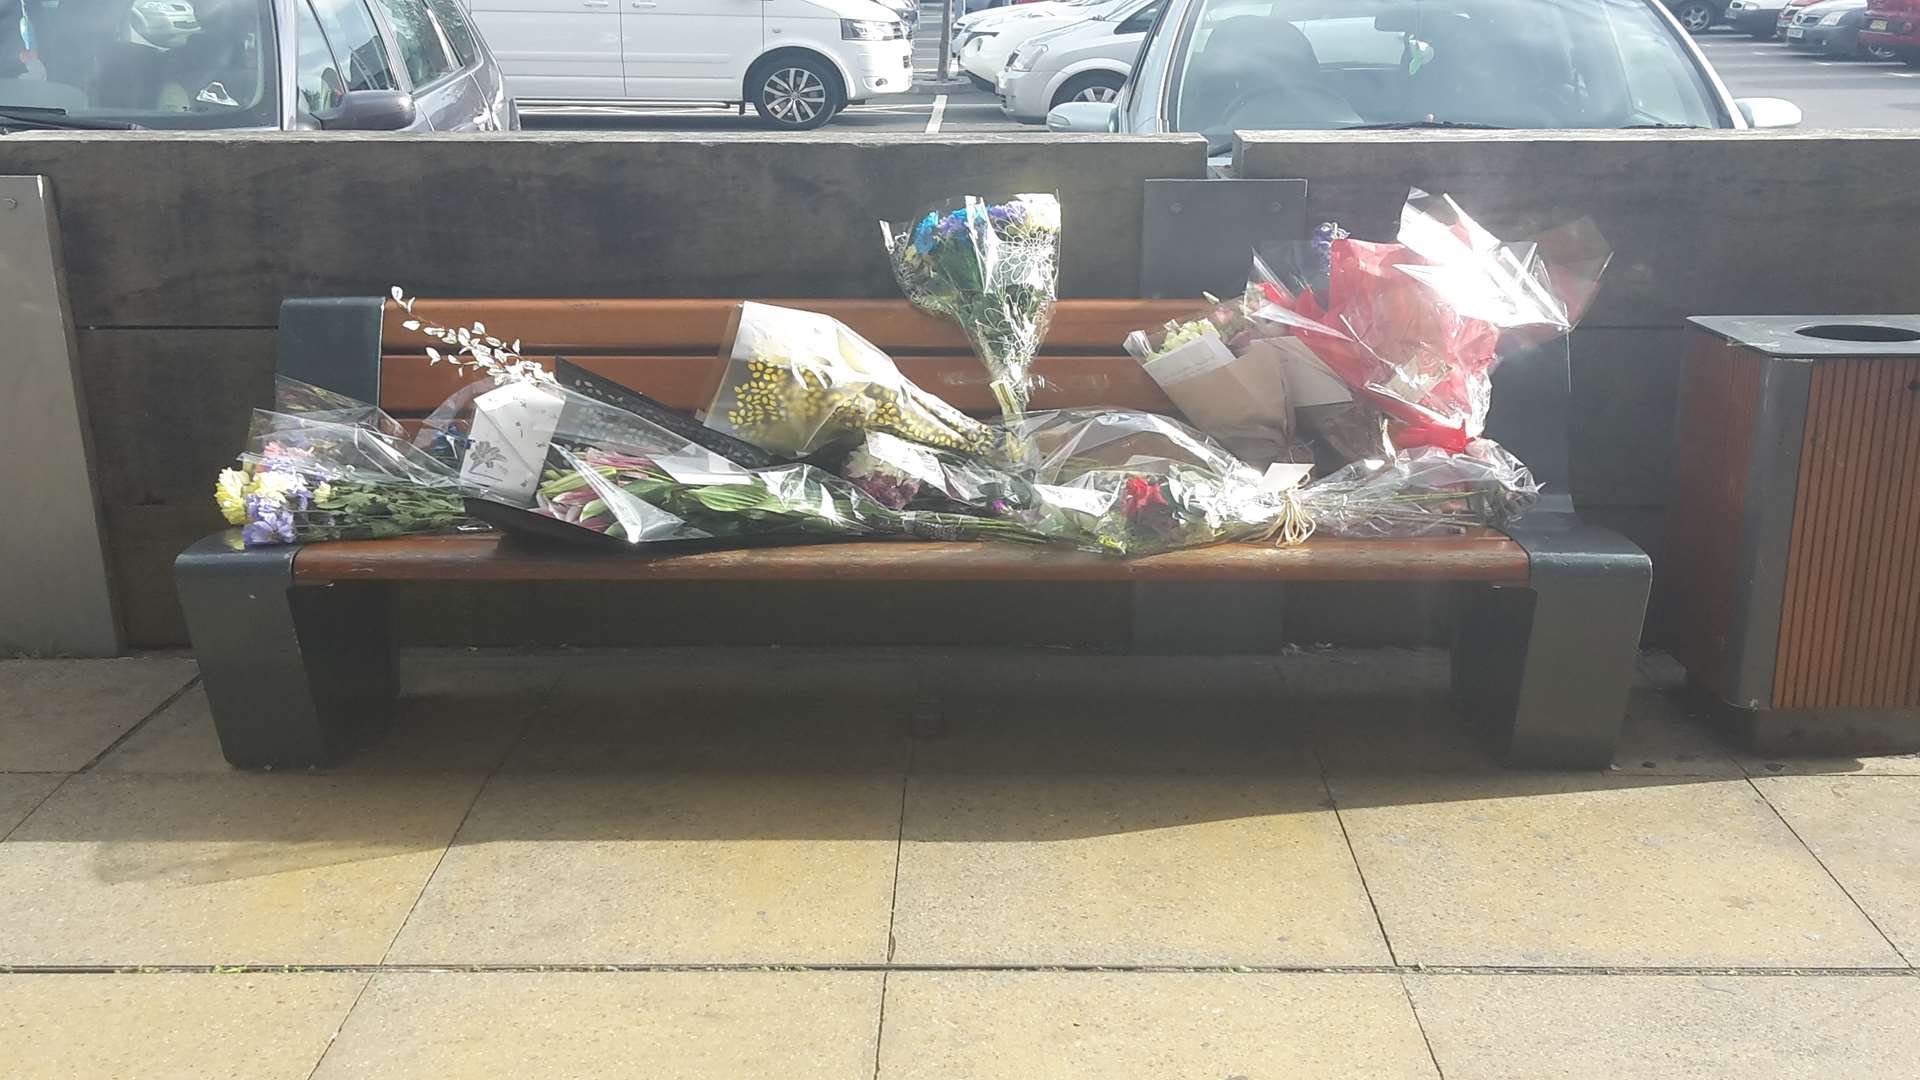 Floral tributes left near the scene